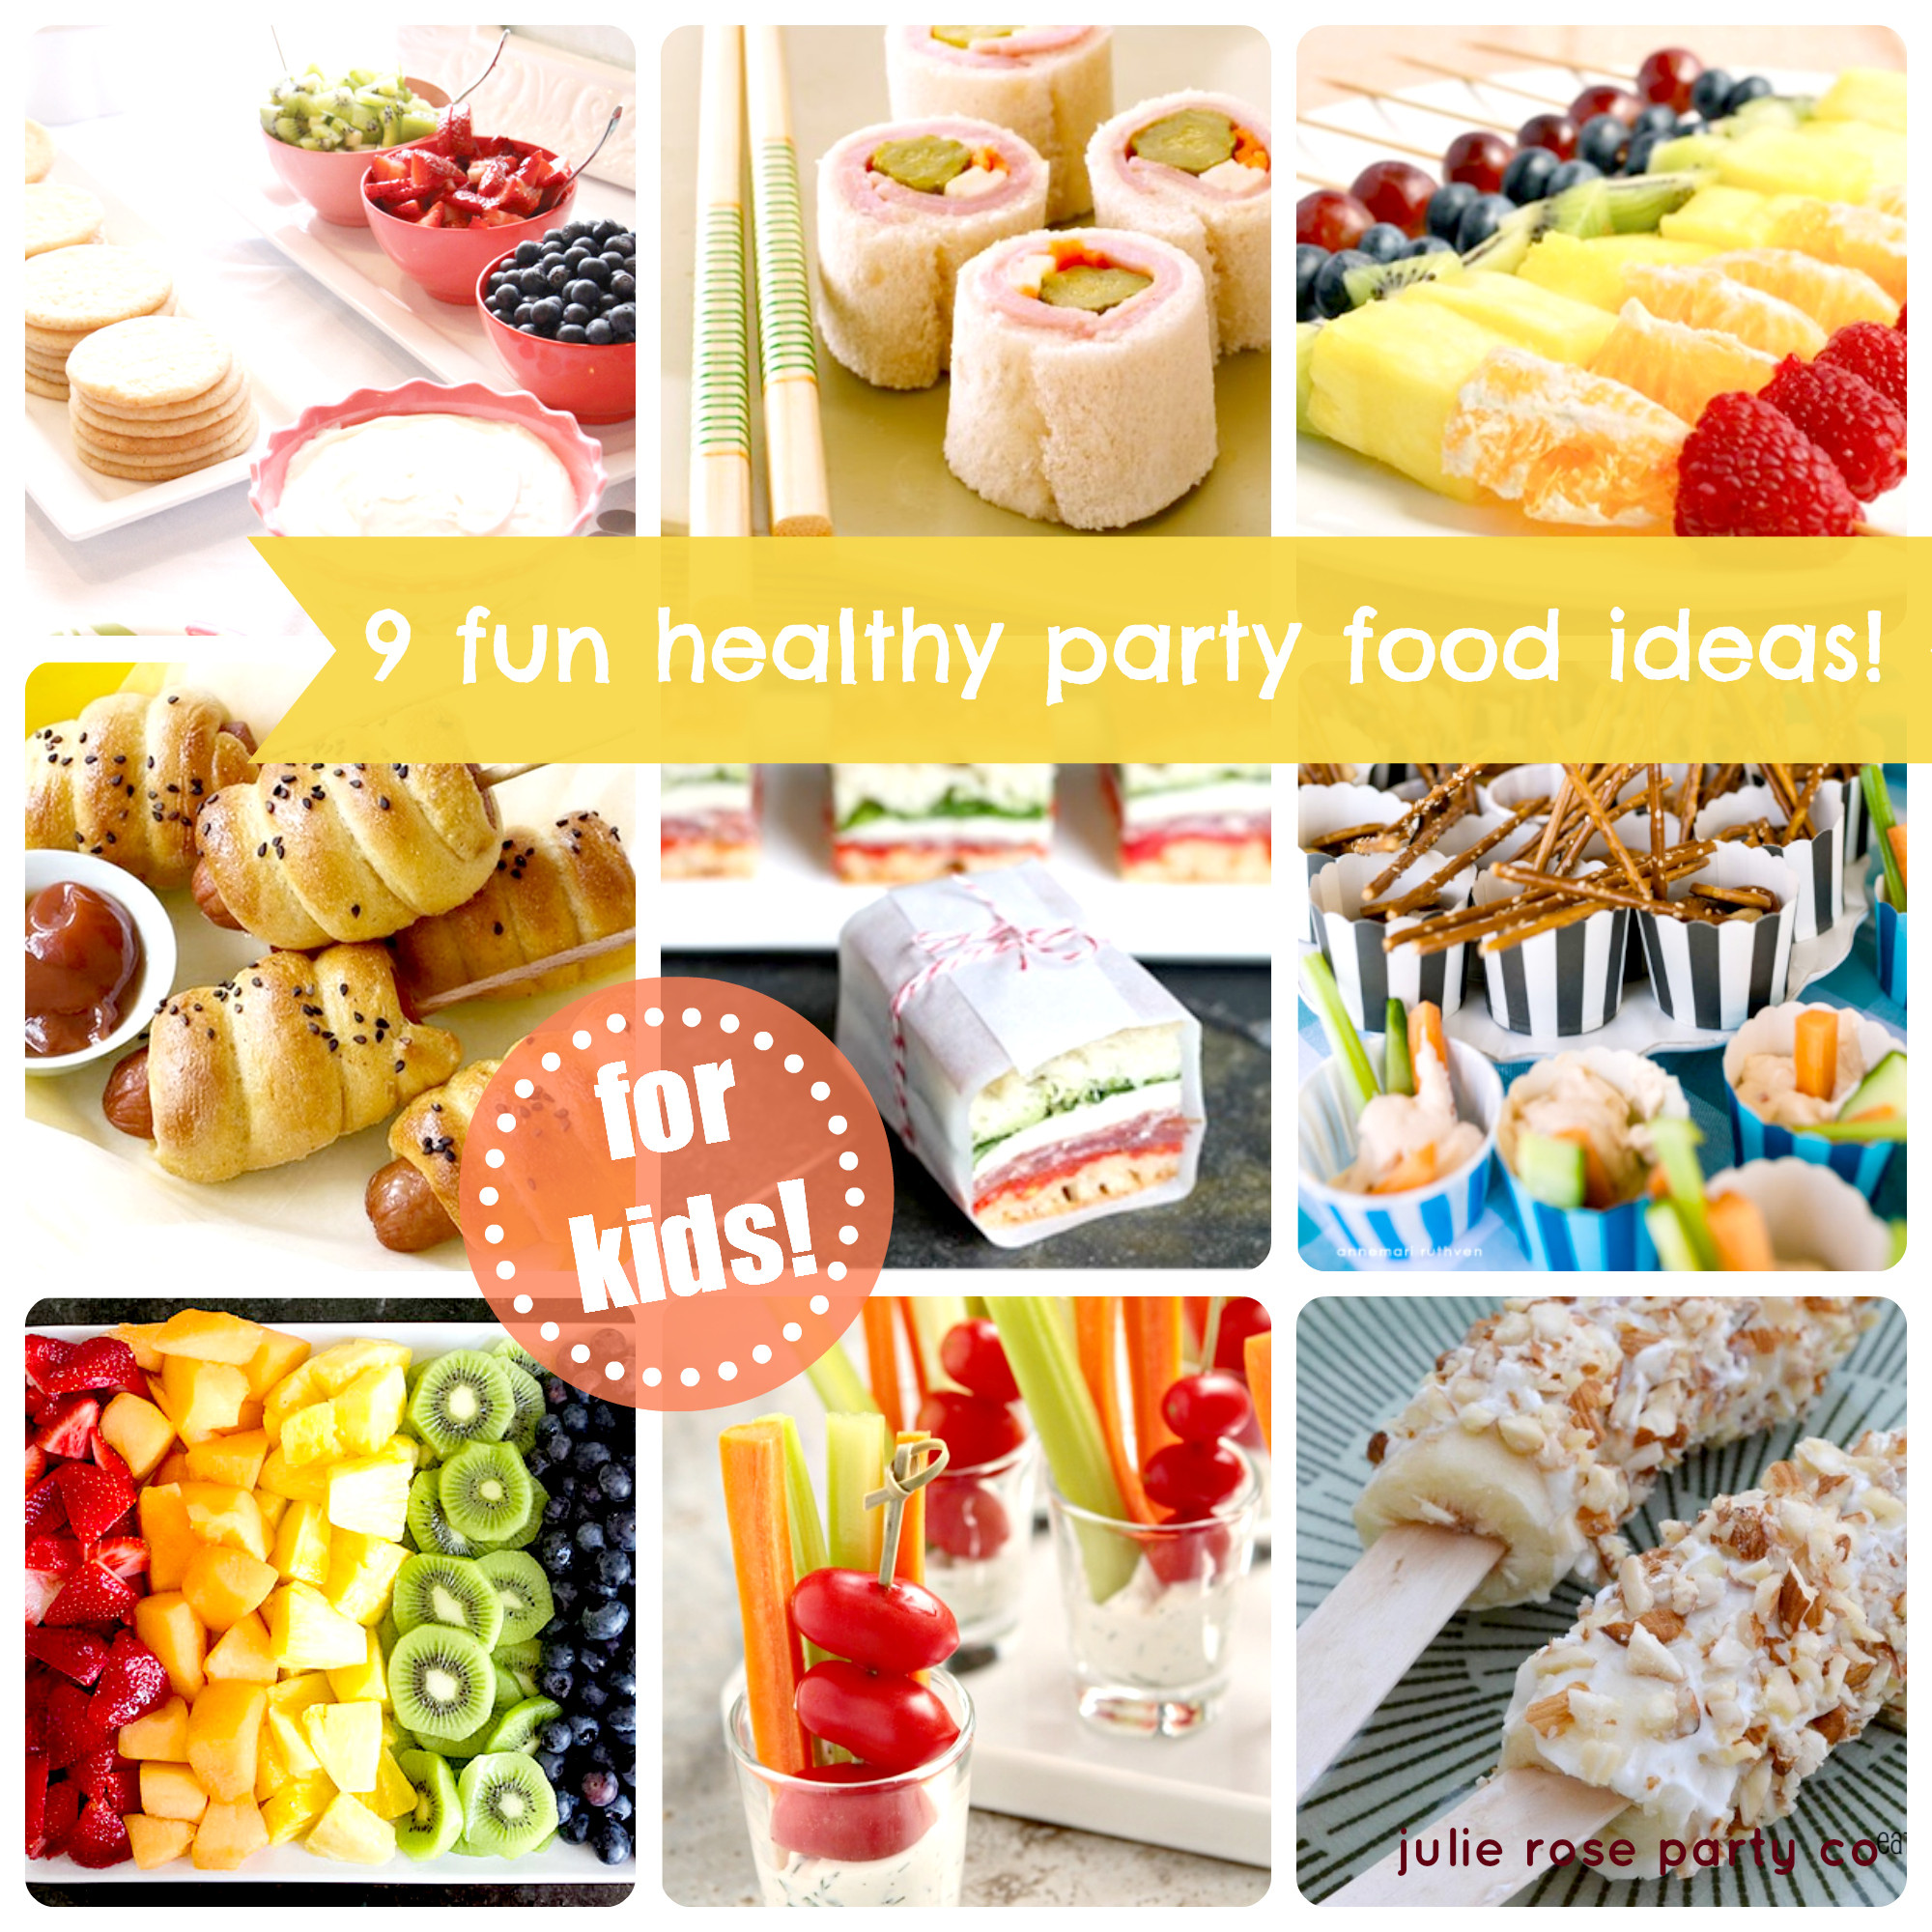 Kids Birthday Party Snack Ideas
 9 fun and healthy party food ideas kids